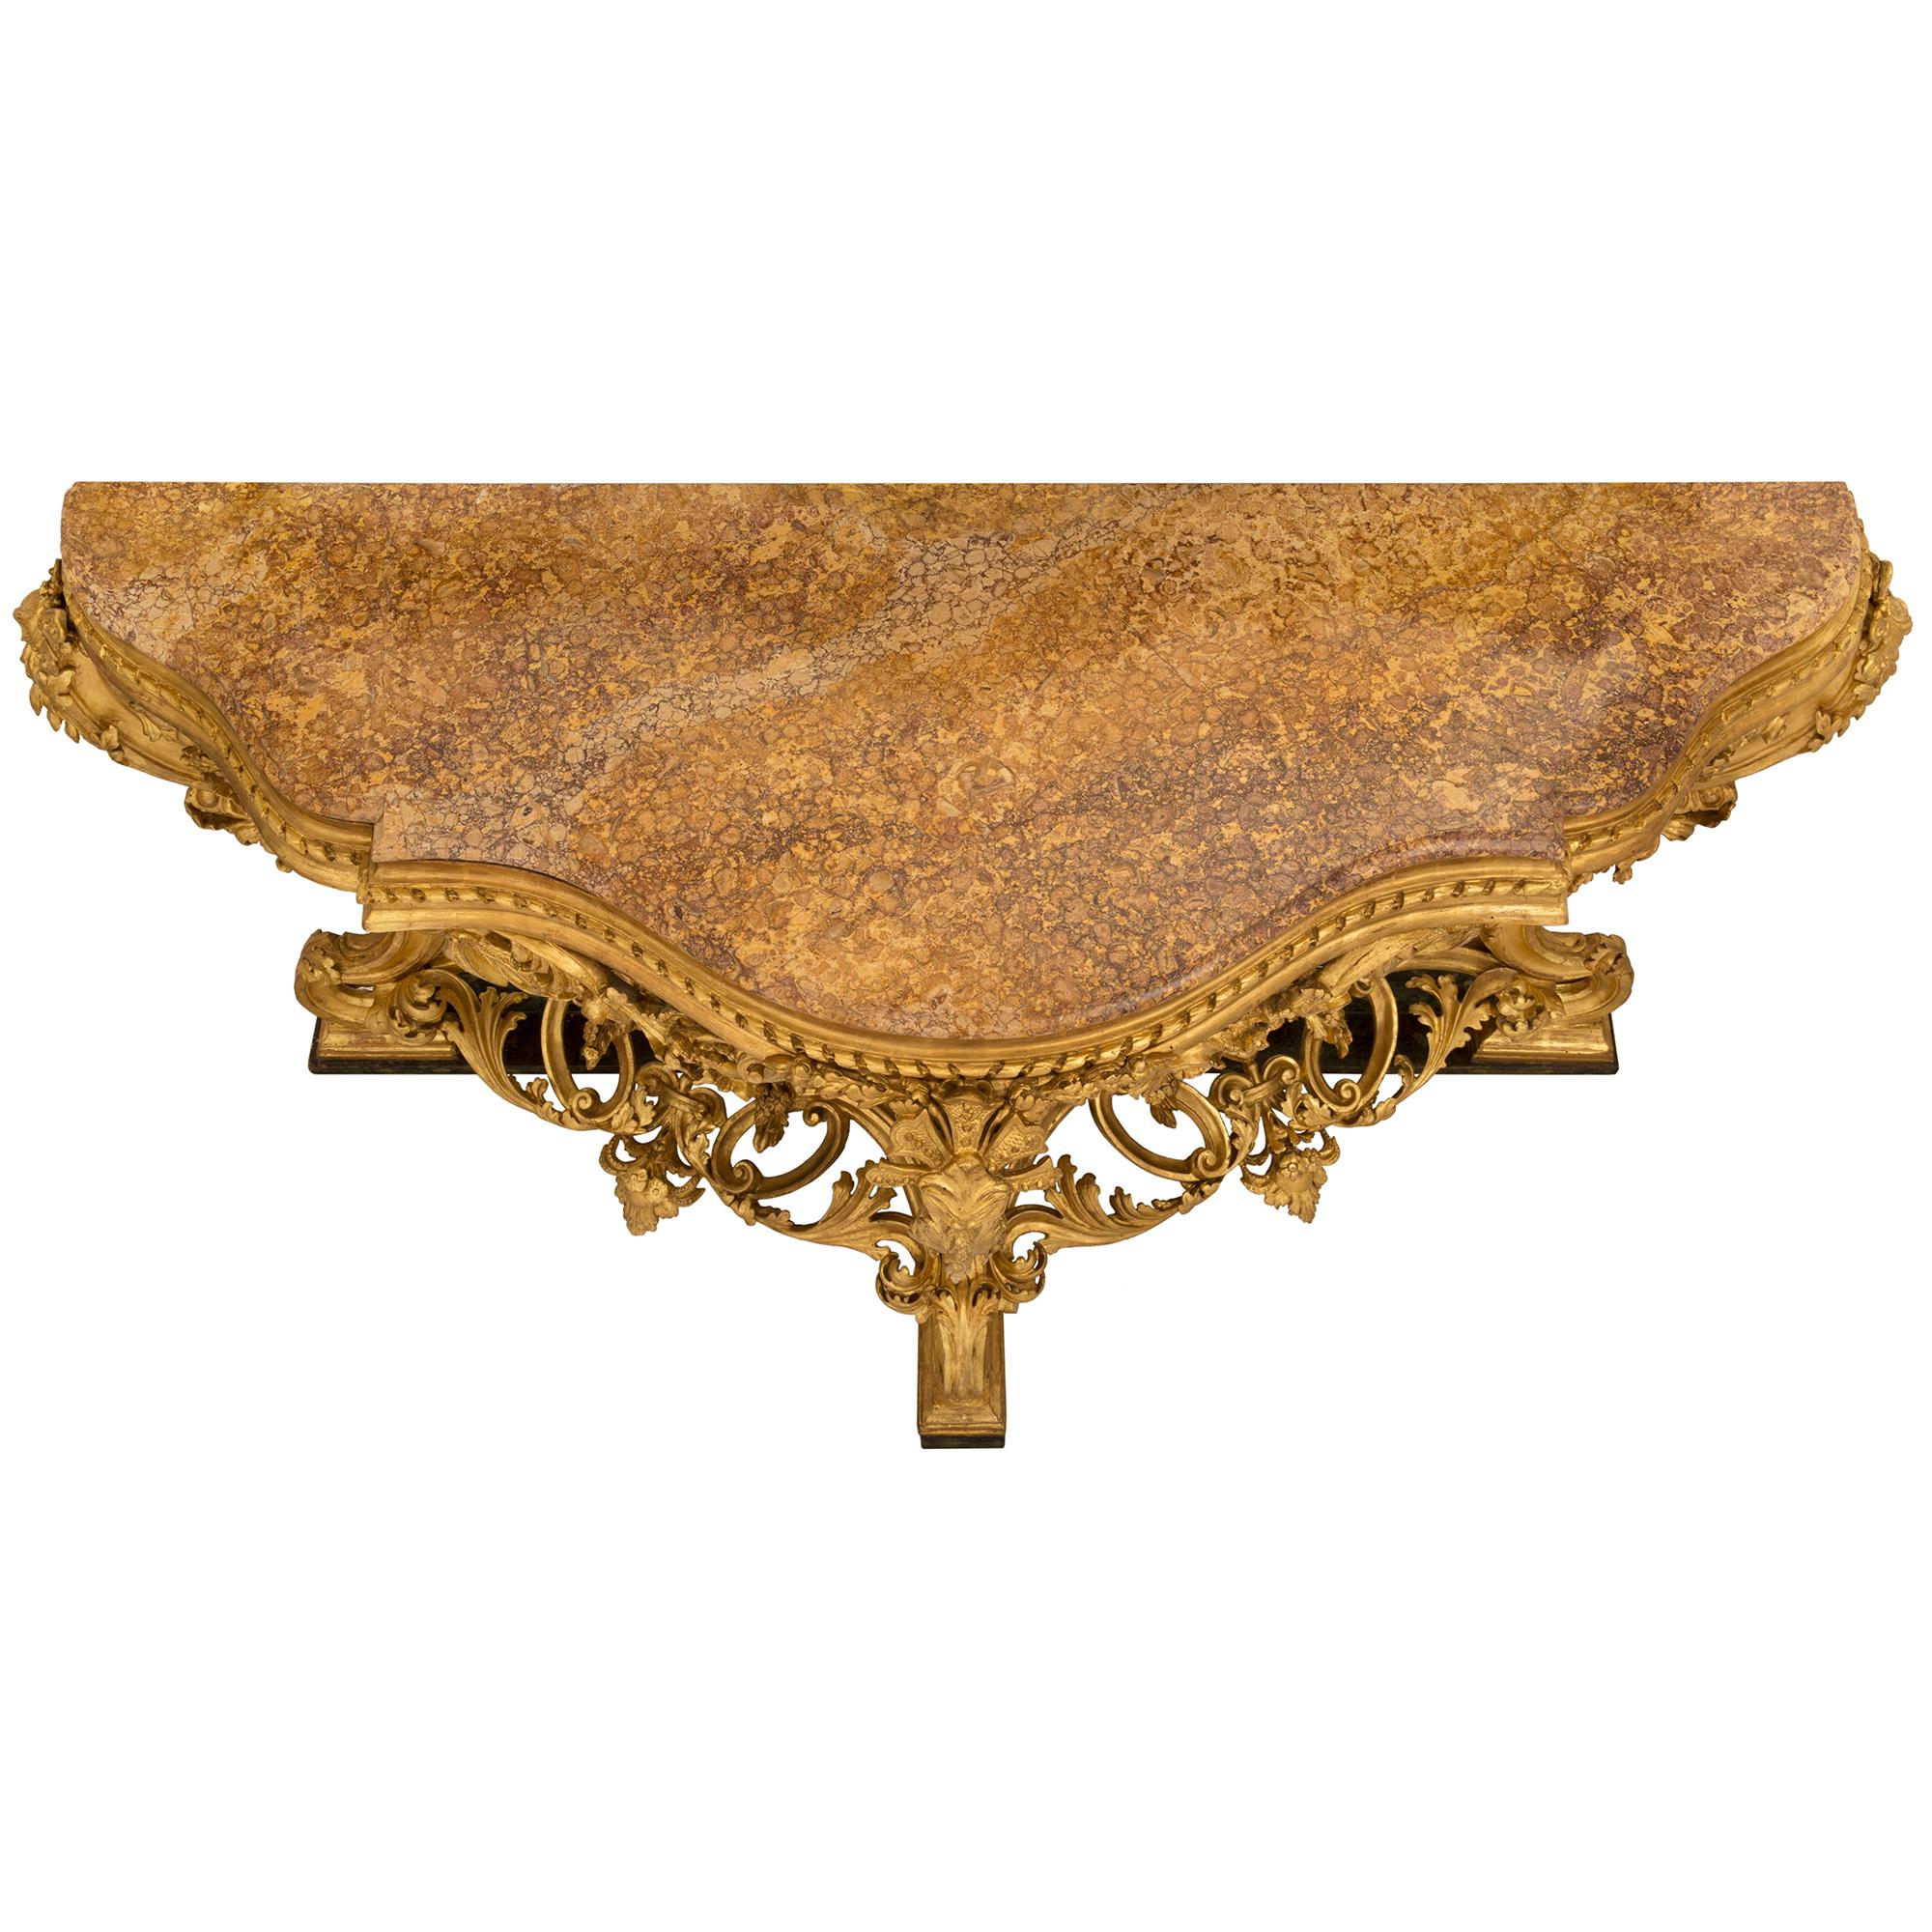 A stunning Italian 19th century Louis XV st. faux painted marble, giltwood and Brocatelle d'Espagne marble console. The freestanding console is raised by a wonderfully executed faux painted marble base and three impressive richly carved scrolled